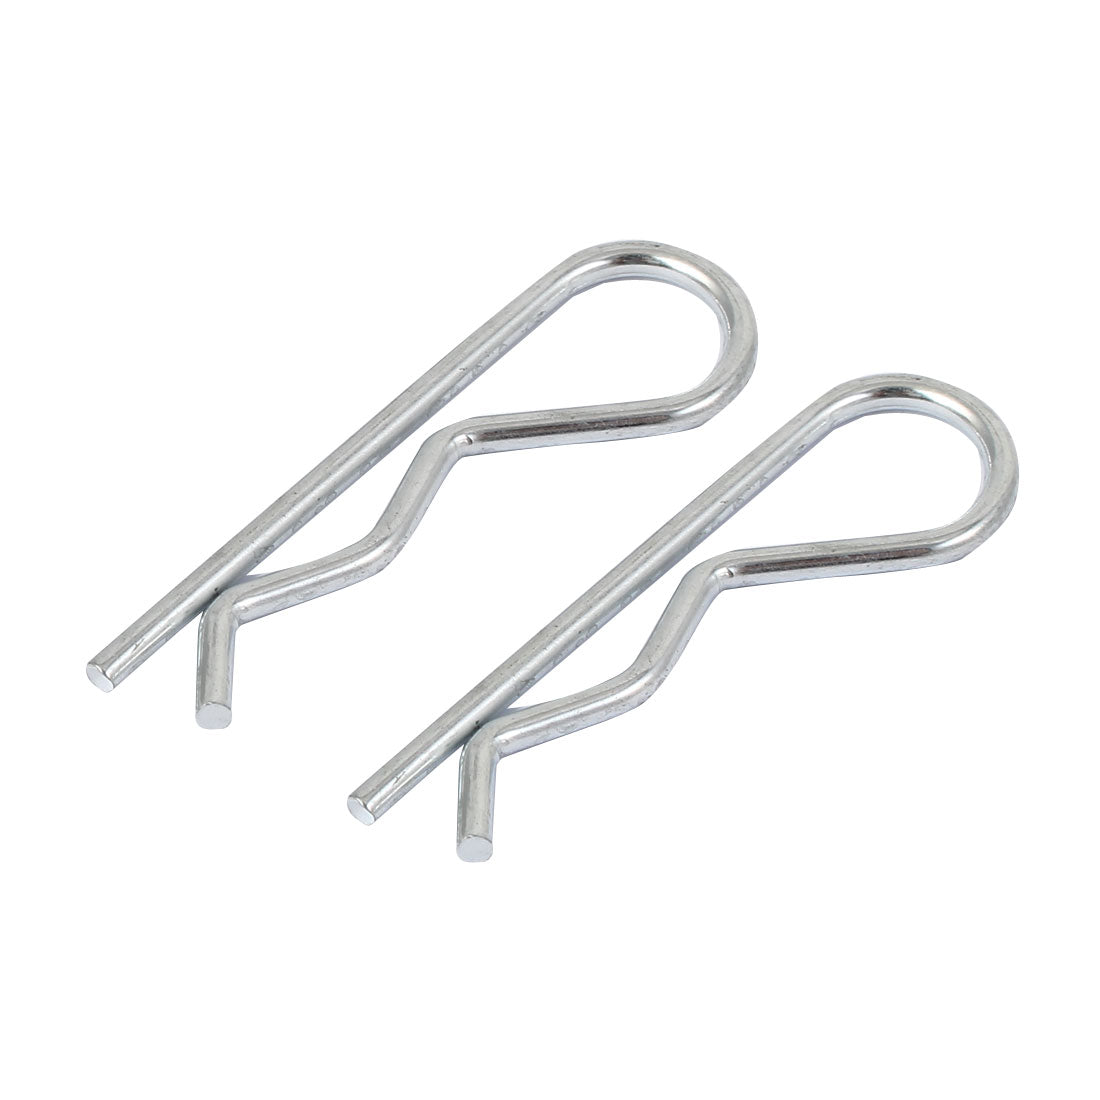 uxcell Uxcell 2.5mm x 45mm R-Clip Spring Locking Cotter Clip Pins Fastener Silver Tone20 Pcs